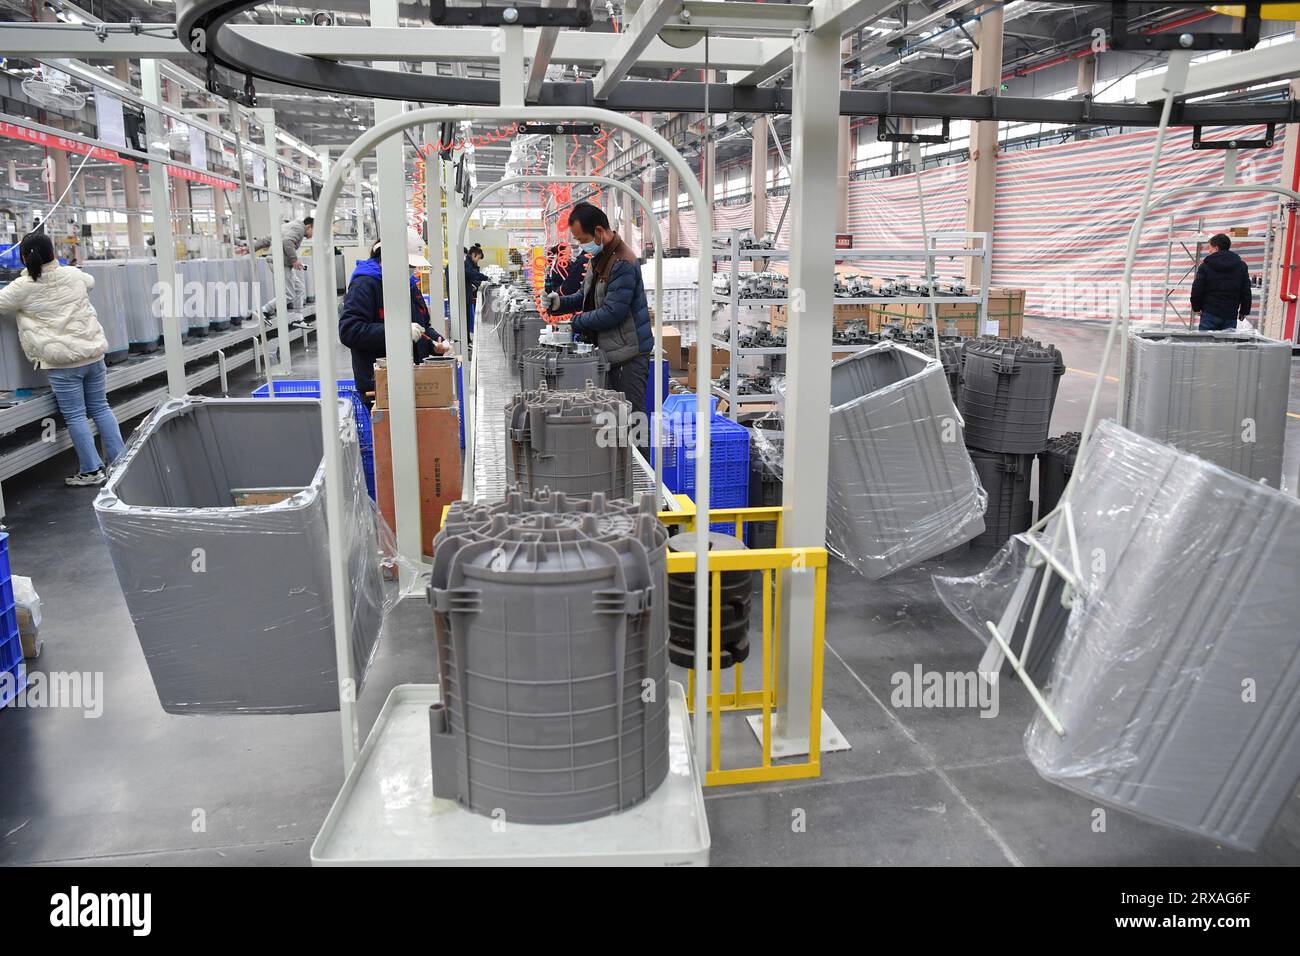 Xi'an, China's Shaanxi Province. 22nd Feb, 2023. Employees assemble washing machines on a production line of an electrical appliance company near Xi'an International Port in Xi'an, northwest China's Shaanxi Province, Feb. 22, 2023. The Chang'an China-Europe freight train service was launched in 2013, when China proposed the Belt and Road Initiative. In the past ten years, Xi'an International Port, the starting station of the Chang'an China-Europe freight trains, has been developed from a small cargo station to an international logistic hub. Credit: Shao Rui/Xinhua/Alamy Live News Stock Photo